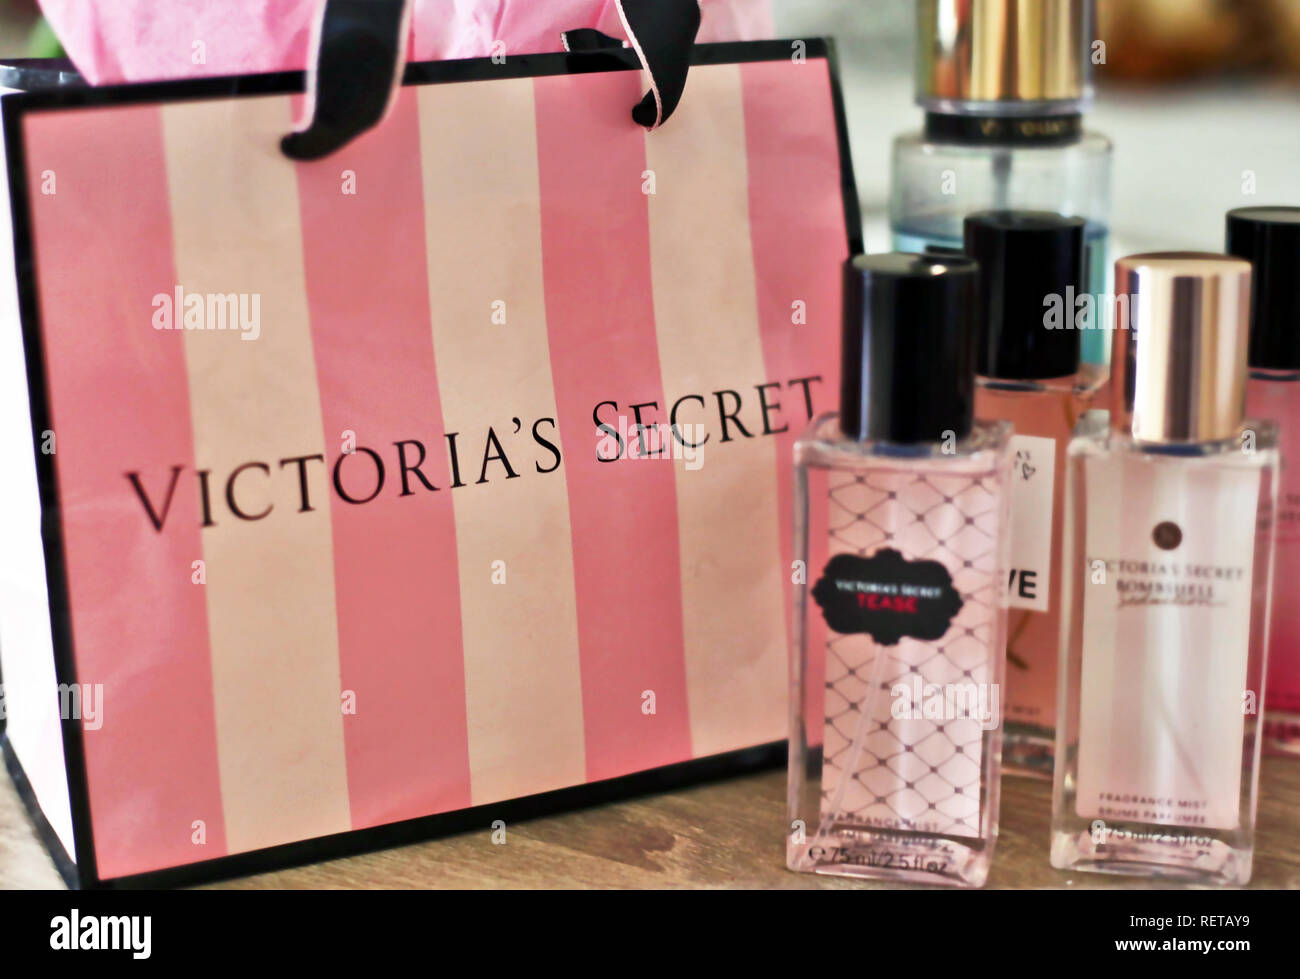 Victorias secret accessories hi-res stock photography and images - Alamy